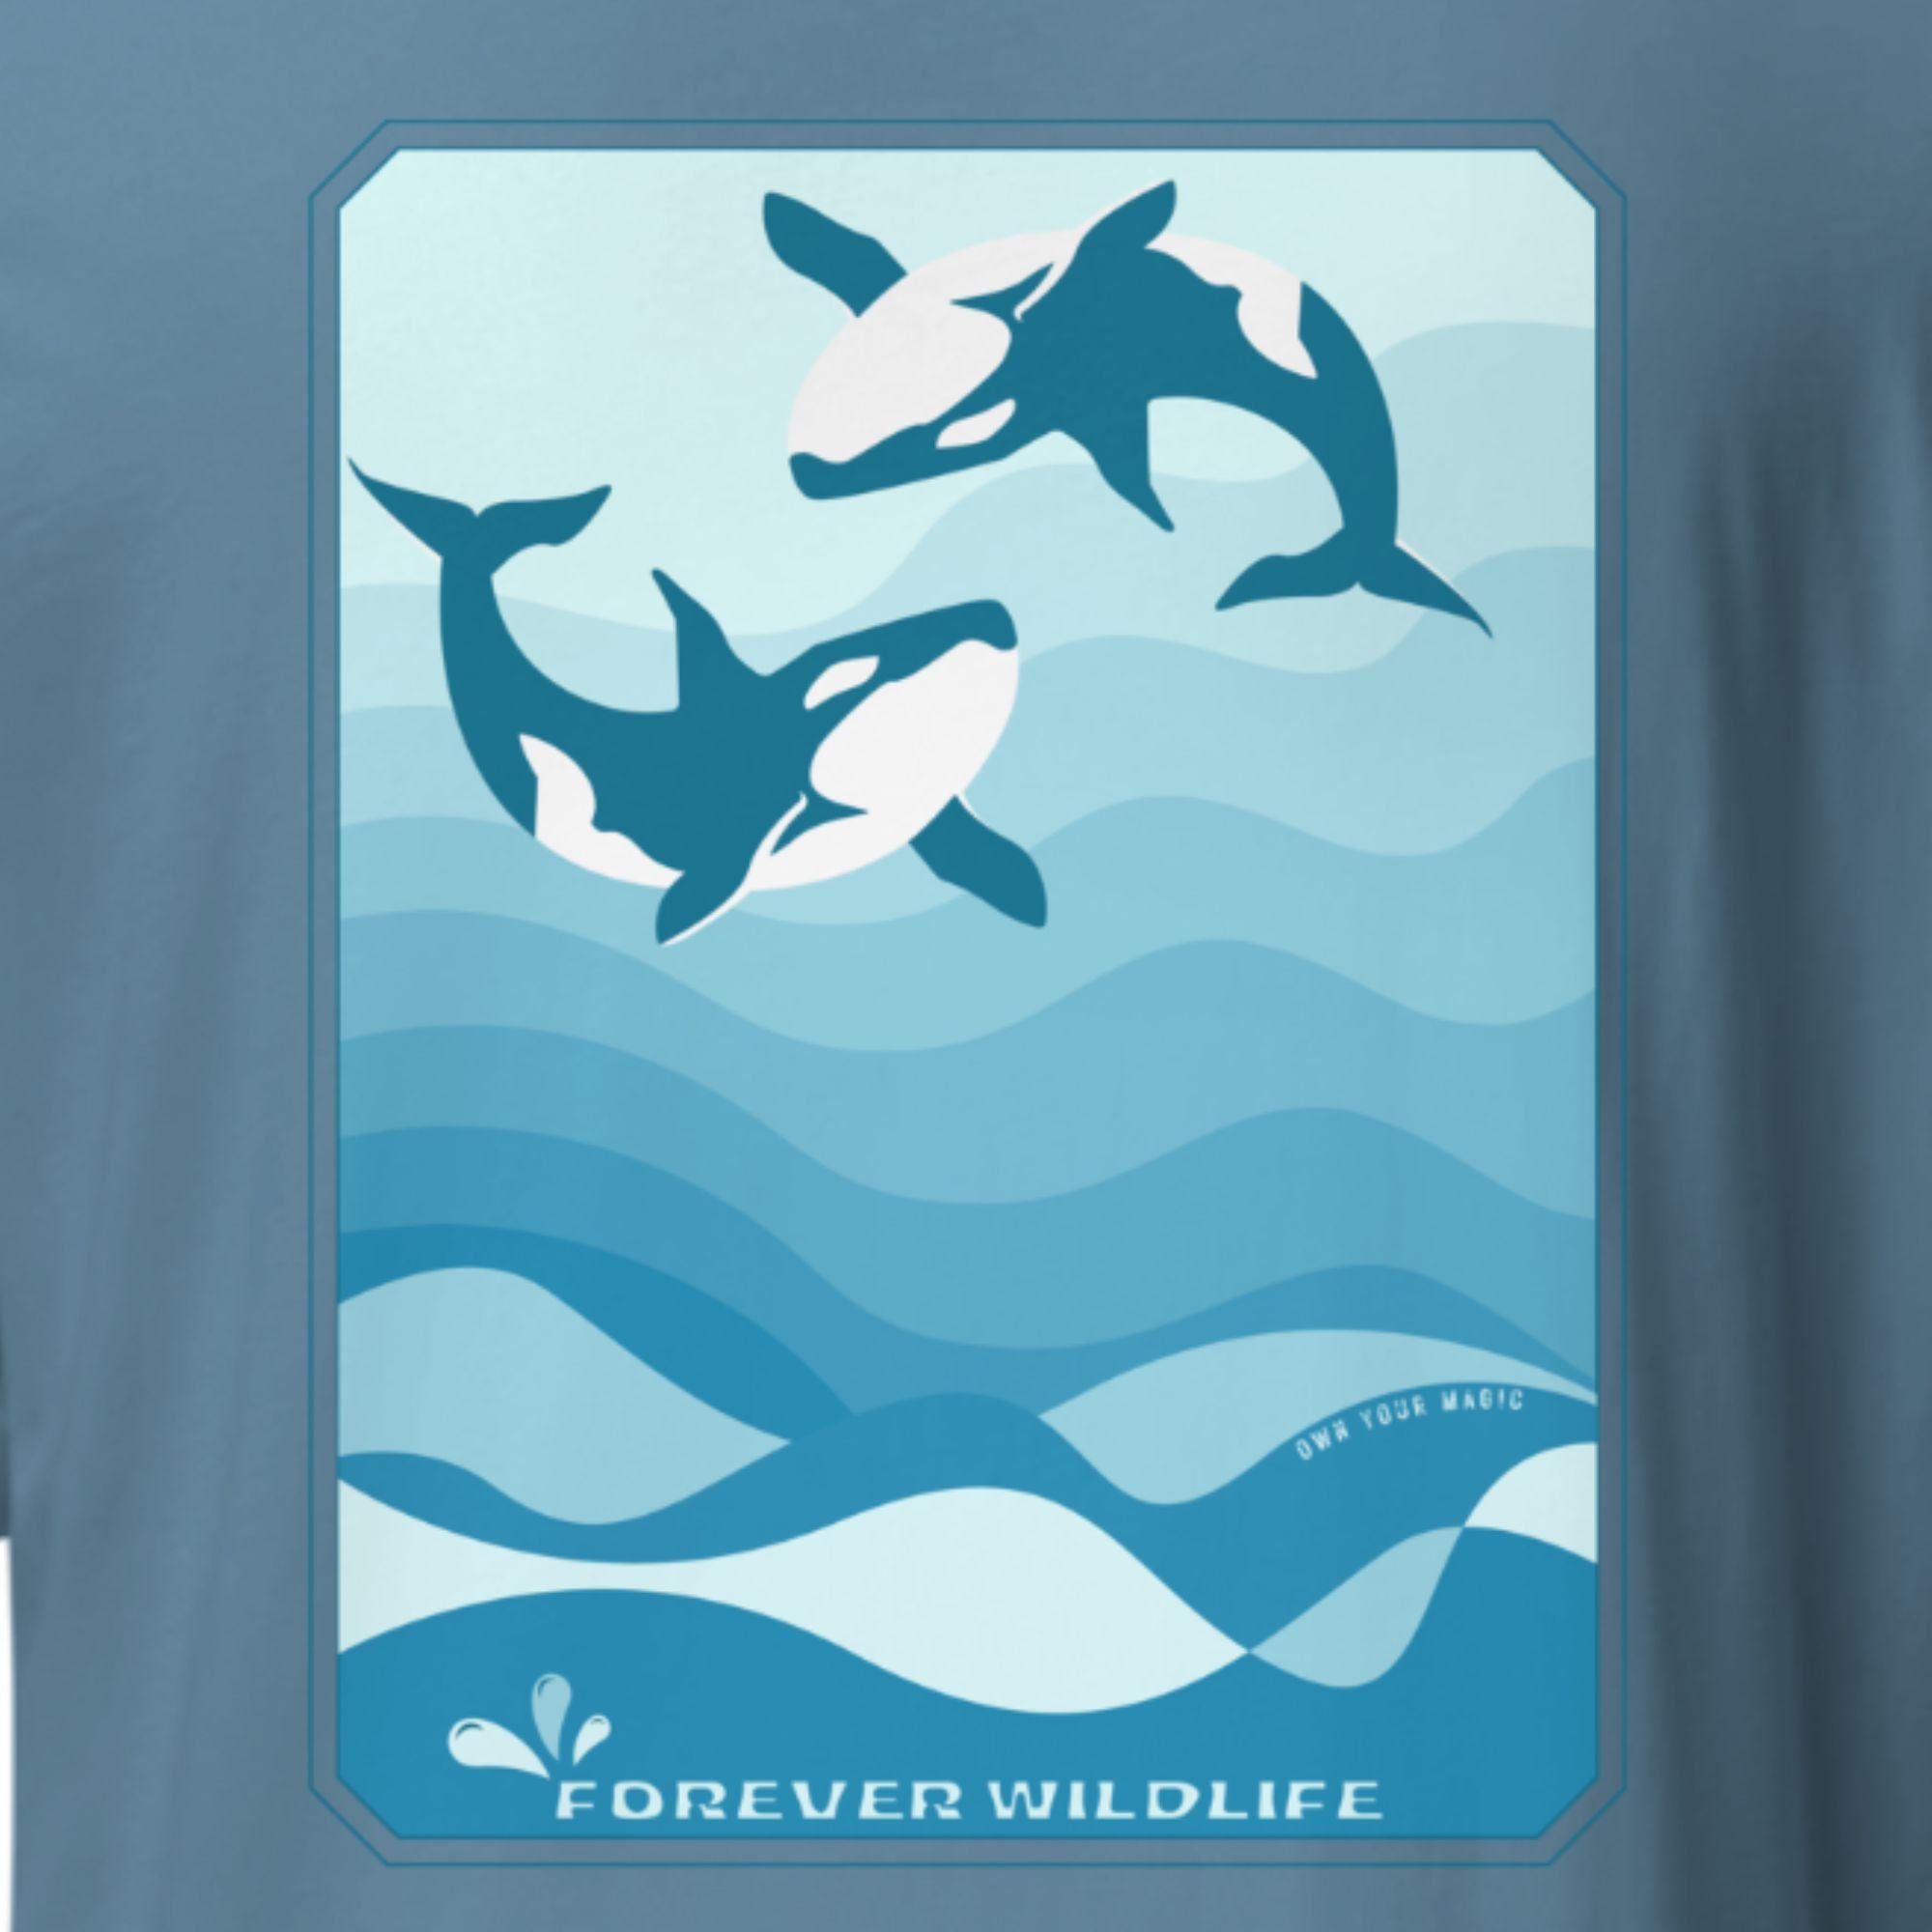 Orca Shirt, beautiful Blue Steel Orca T-Shirt with Killer Whales on the shirt by Forever Wildlife selling Wildlife T Shirts.